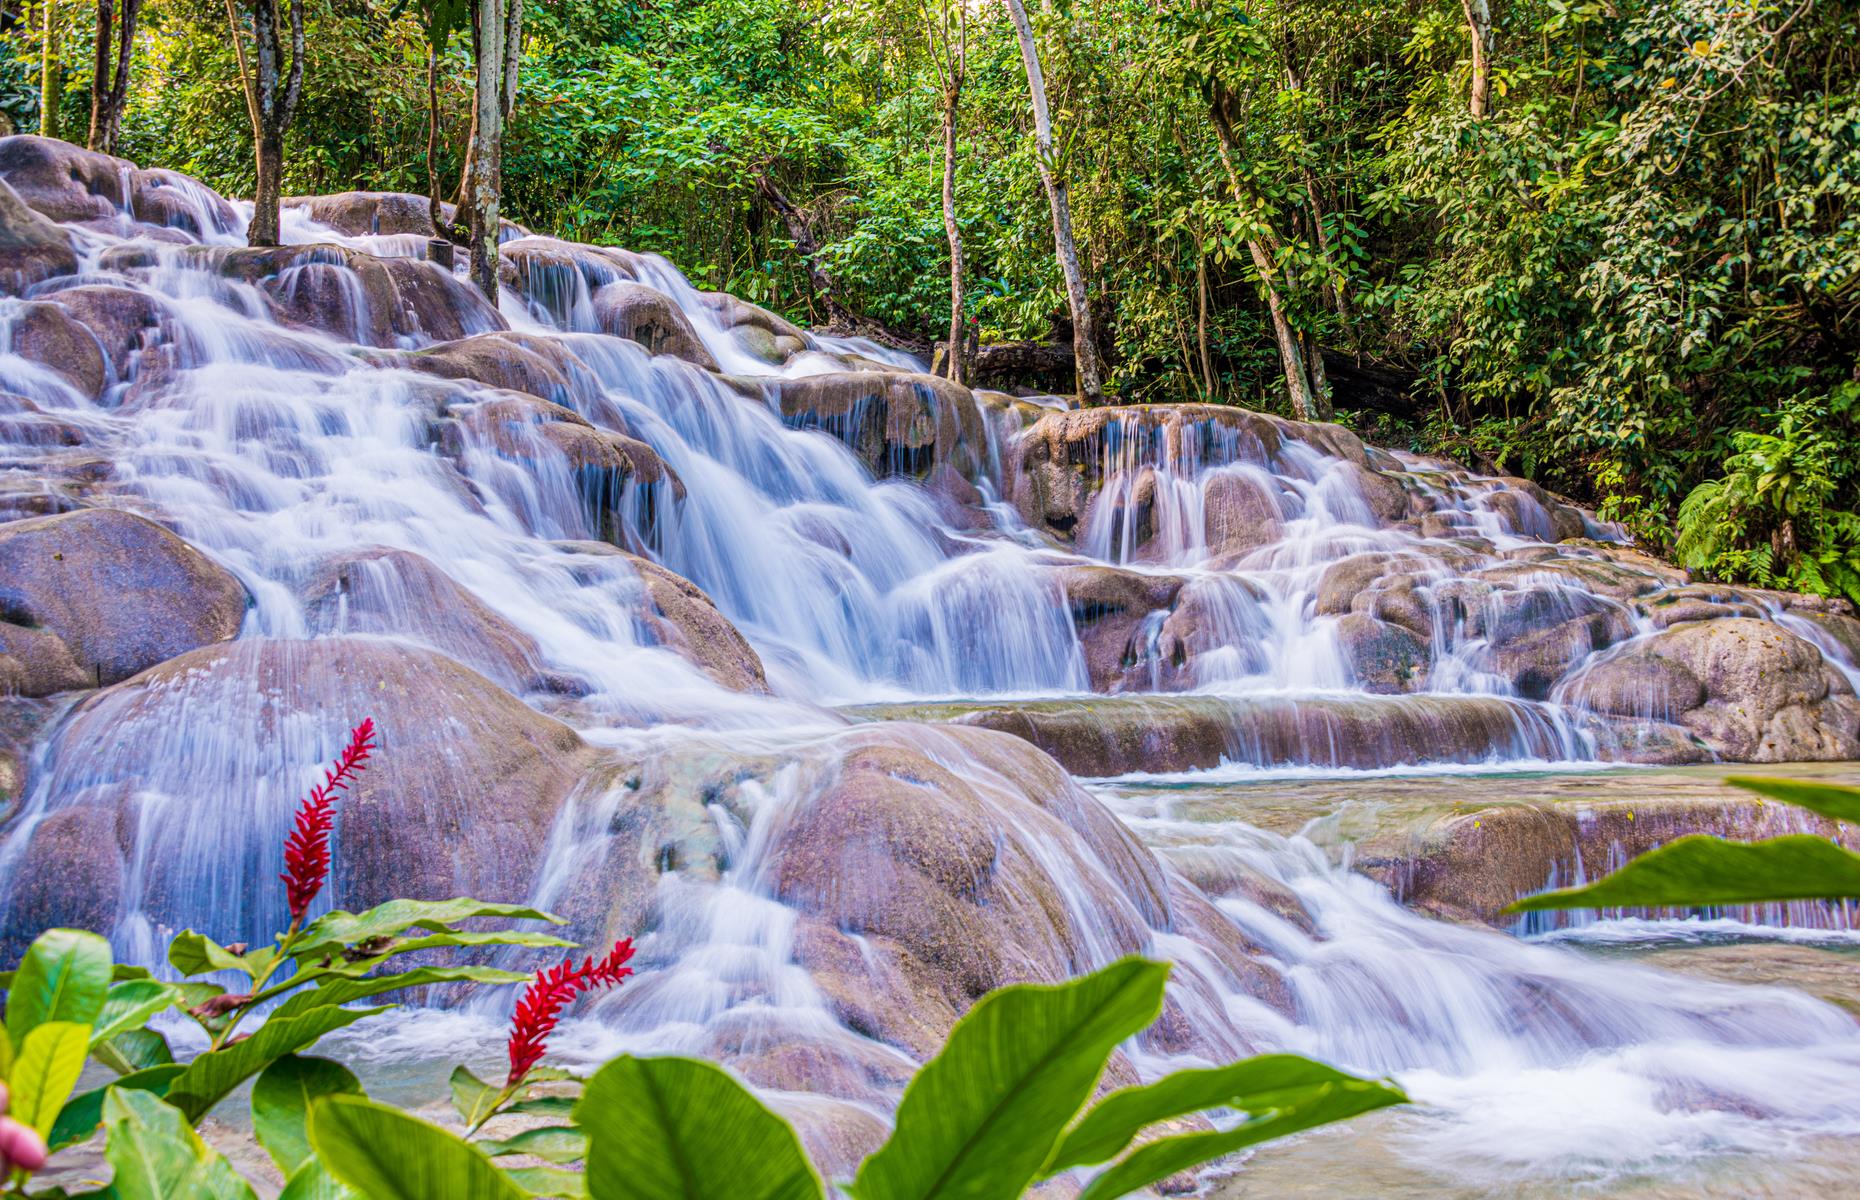 <p>The Dunns River Falls, spectacular rock pools and cascades that tumble down to the sea near Ocho Rios, are one of the country’s most popular sights and famously featured in <em>Dr No</em> as part of the fictional Crab Key Island. So did vibrant capital Kingston, where Sean Connery filmed several scenes including at the Governor General’s mansion, King’s House. Away from the Bond connections, the island entrances with its jungle-clad Blue Mountains, plethora of palm-studded beaches, cool music scene, fantastic food and hip hotels. It’s no wonder the super sleuth keeps coming back – the tropical island also makes an appearance in the latest 007 installment.</p>